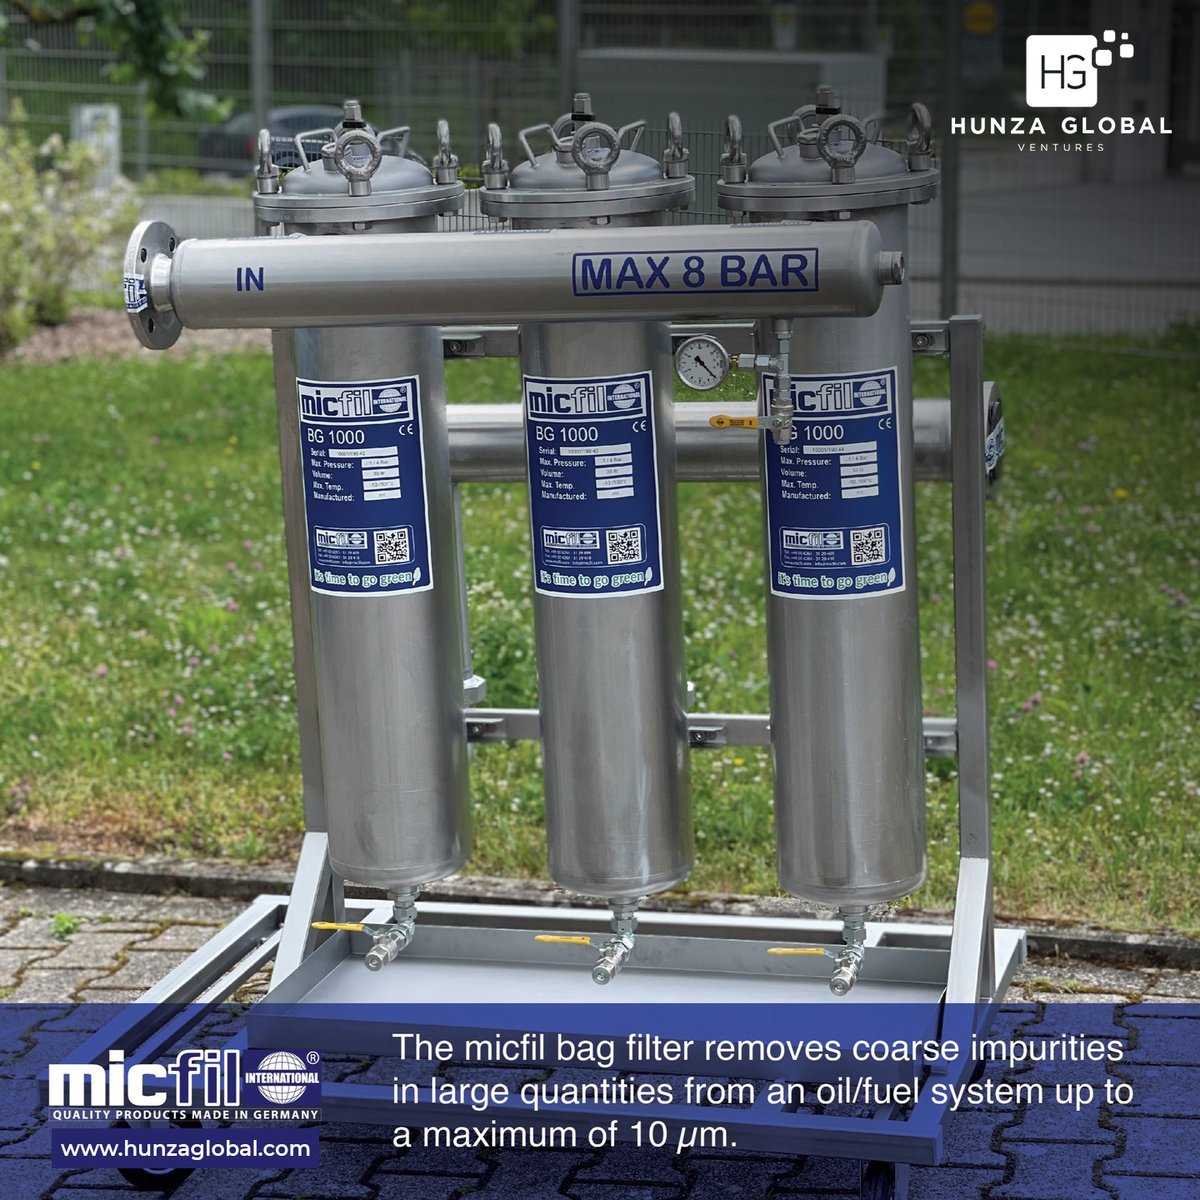 The micfil bag filter removes coarse impurities in large quantities from an oil/fuel system up to a maximum of 20 µm.

#micfil #micfilultrafinefilters #micfilultrafinefiltersgmbh #itstimetogogreen #bagfilter #bagfilters #dubai #fuelfiltration #dieselengine #fuel #sustainability